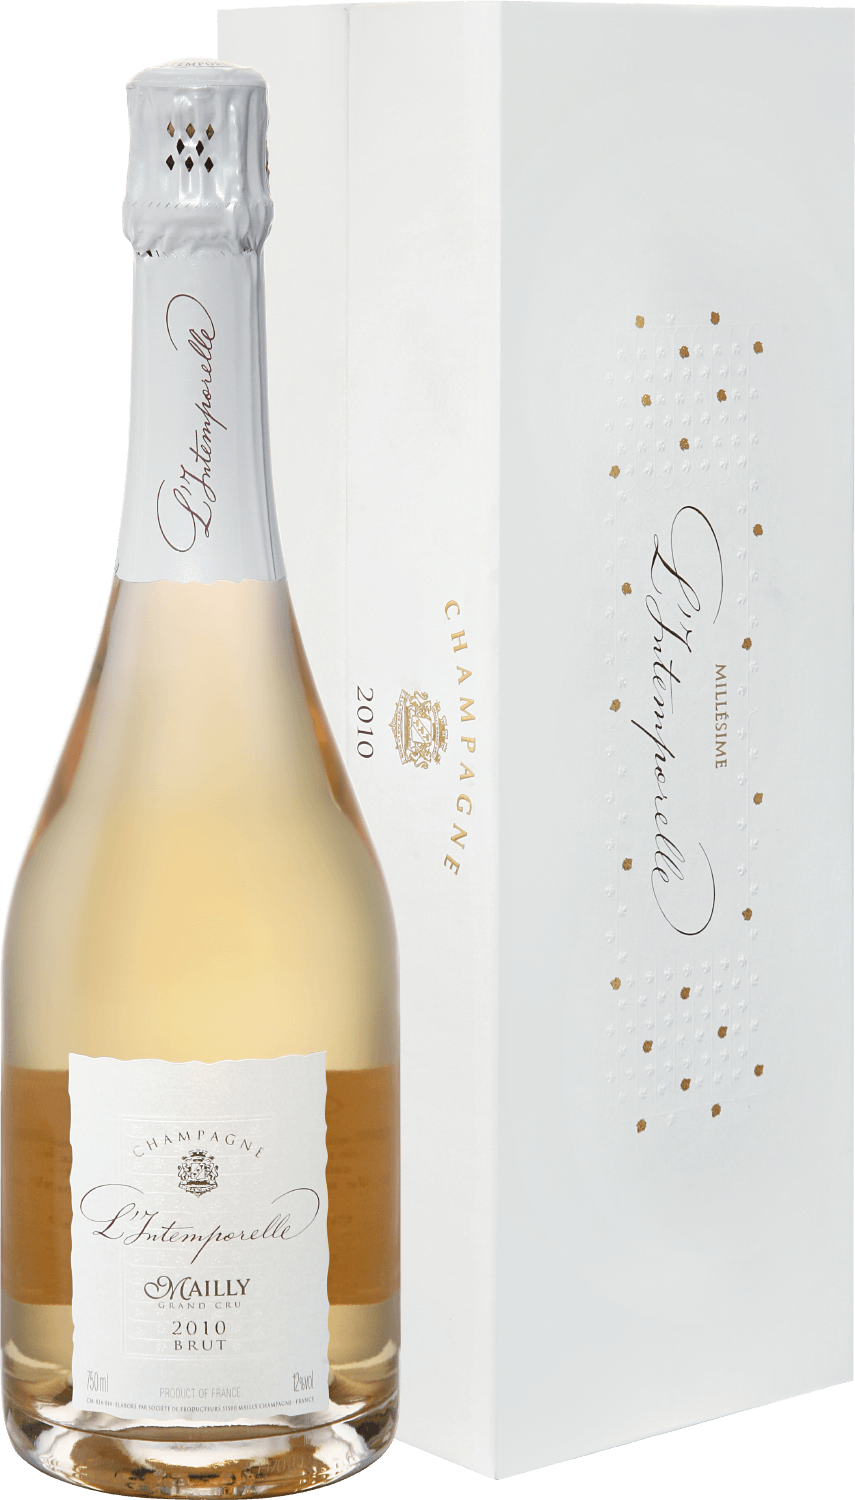 Mailly Grand Cru L’intemporelle Brut Millesime Champagne АОС (gift box) mailly grand cru rose de mailly brut champagne aoc